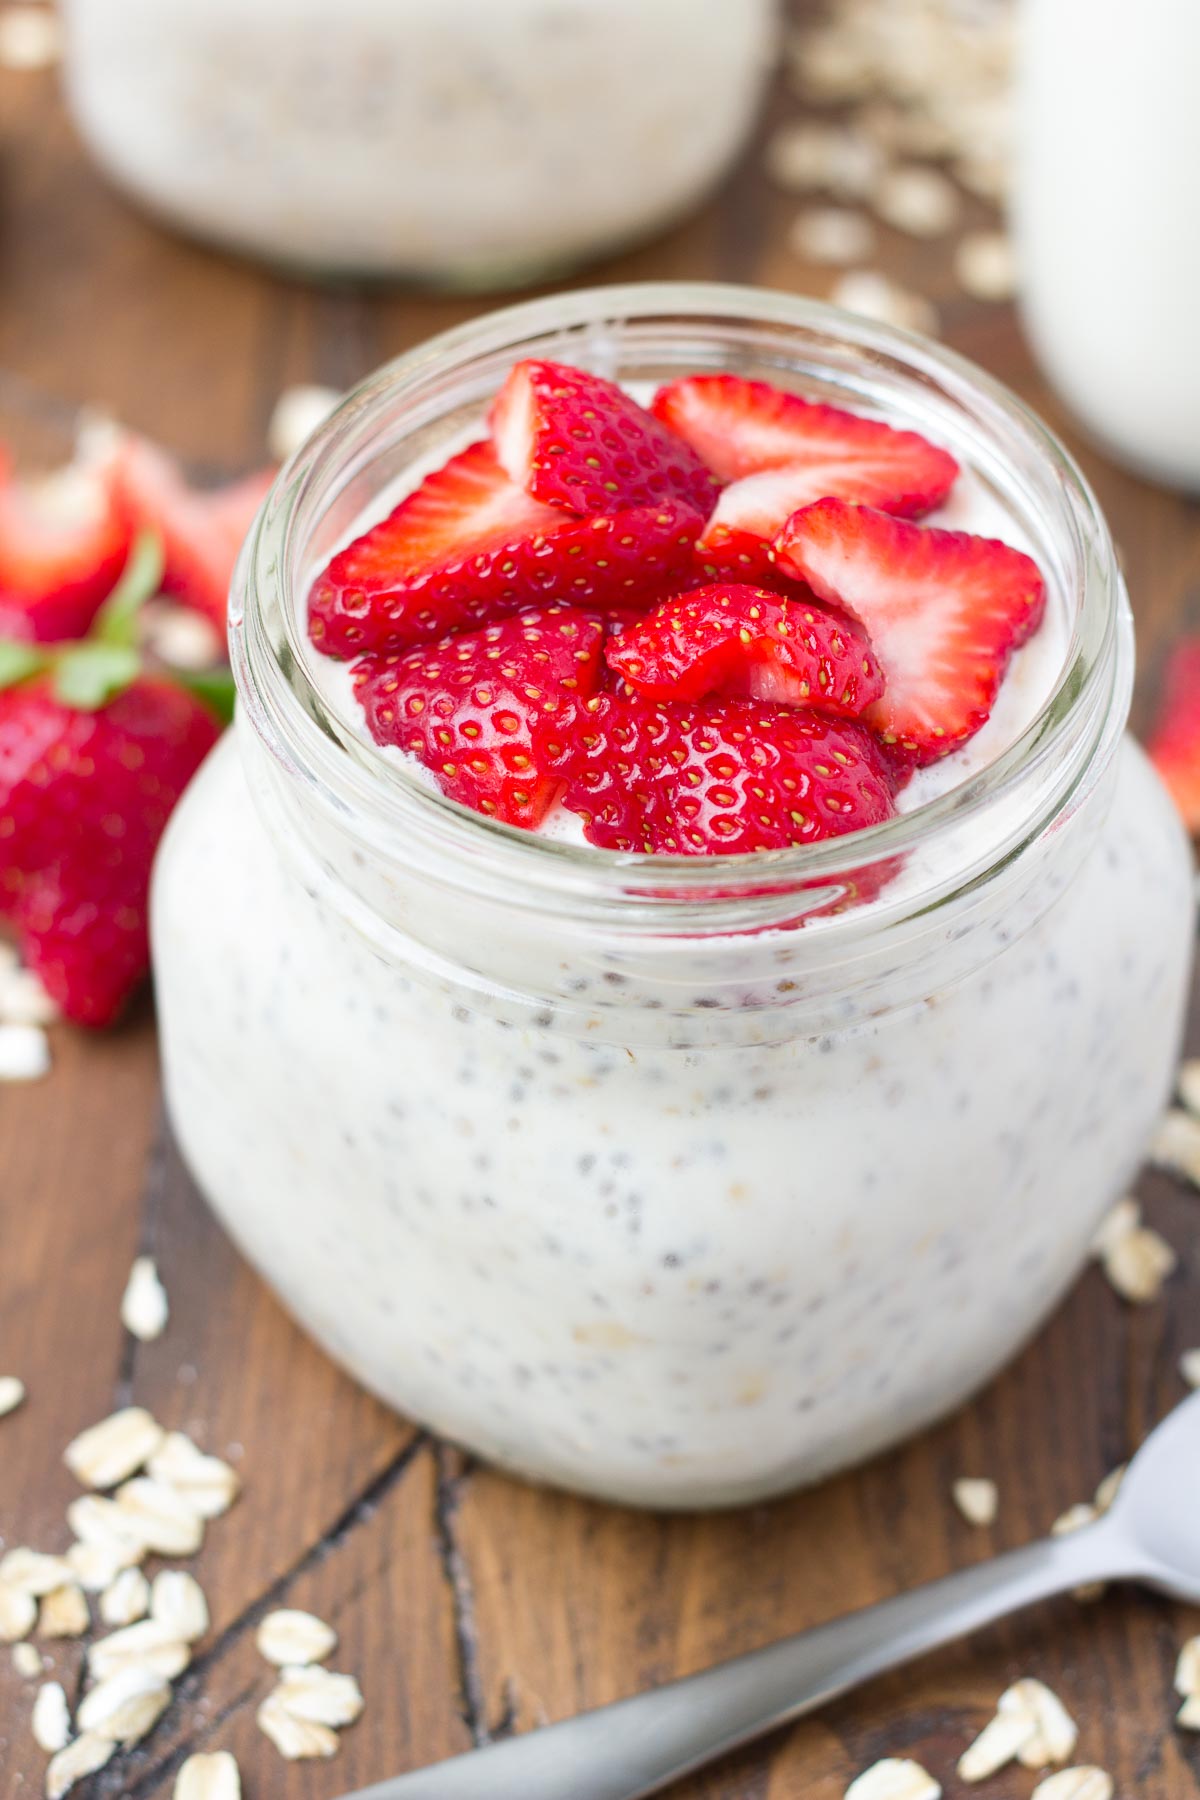 Image result for chia pudding oatmeal